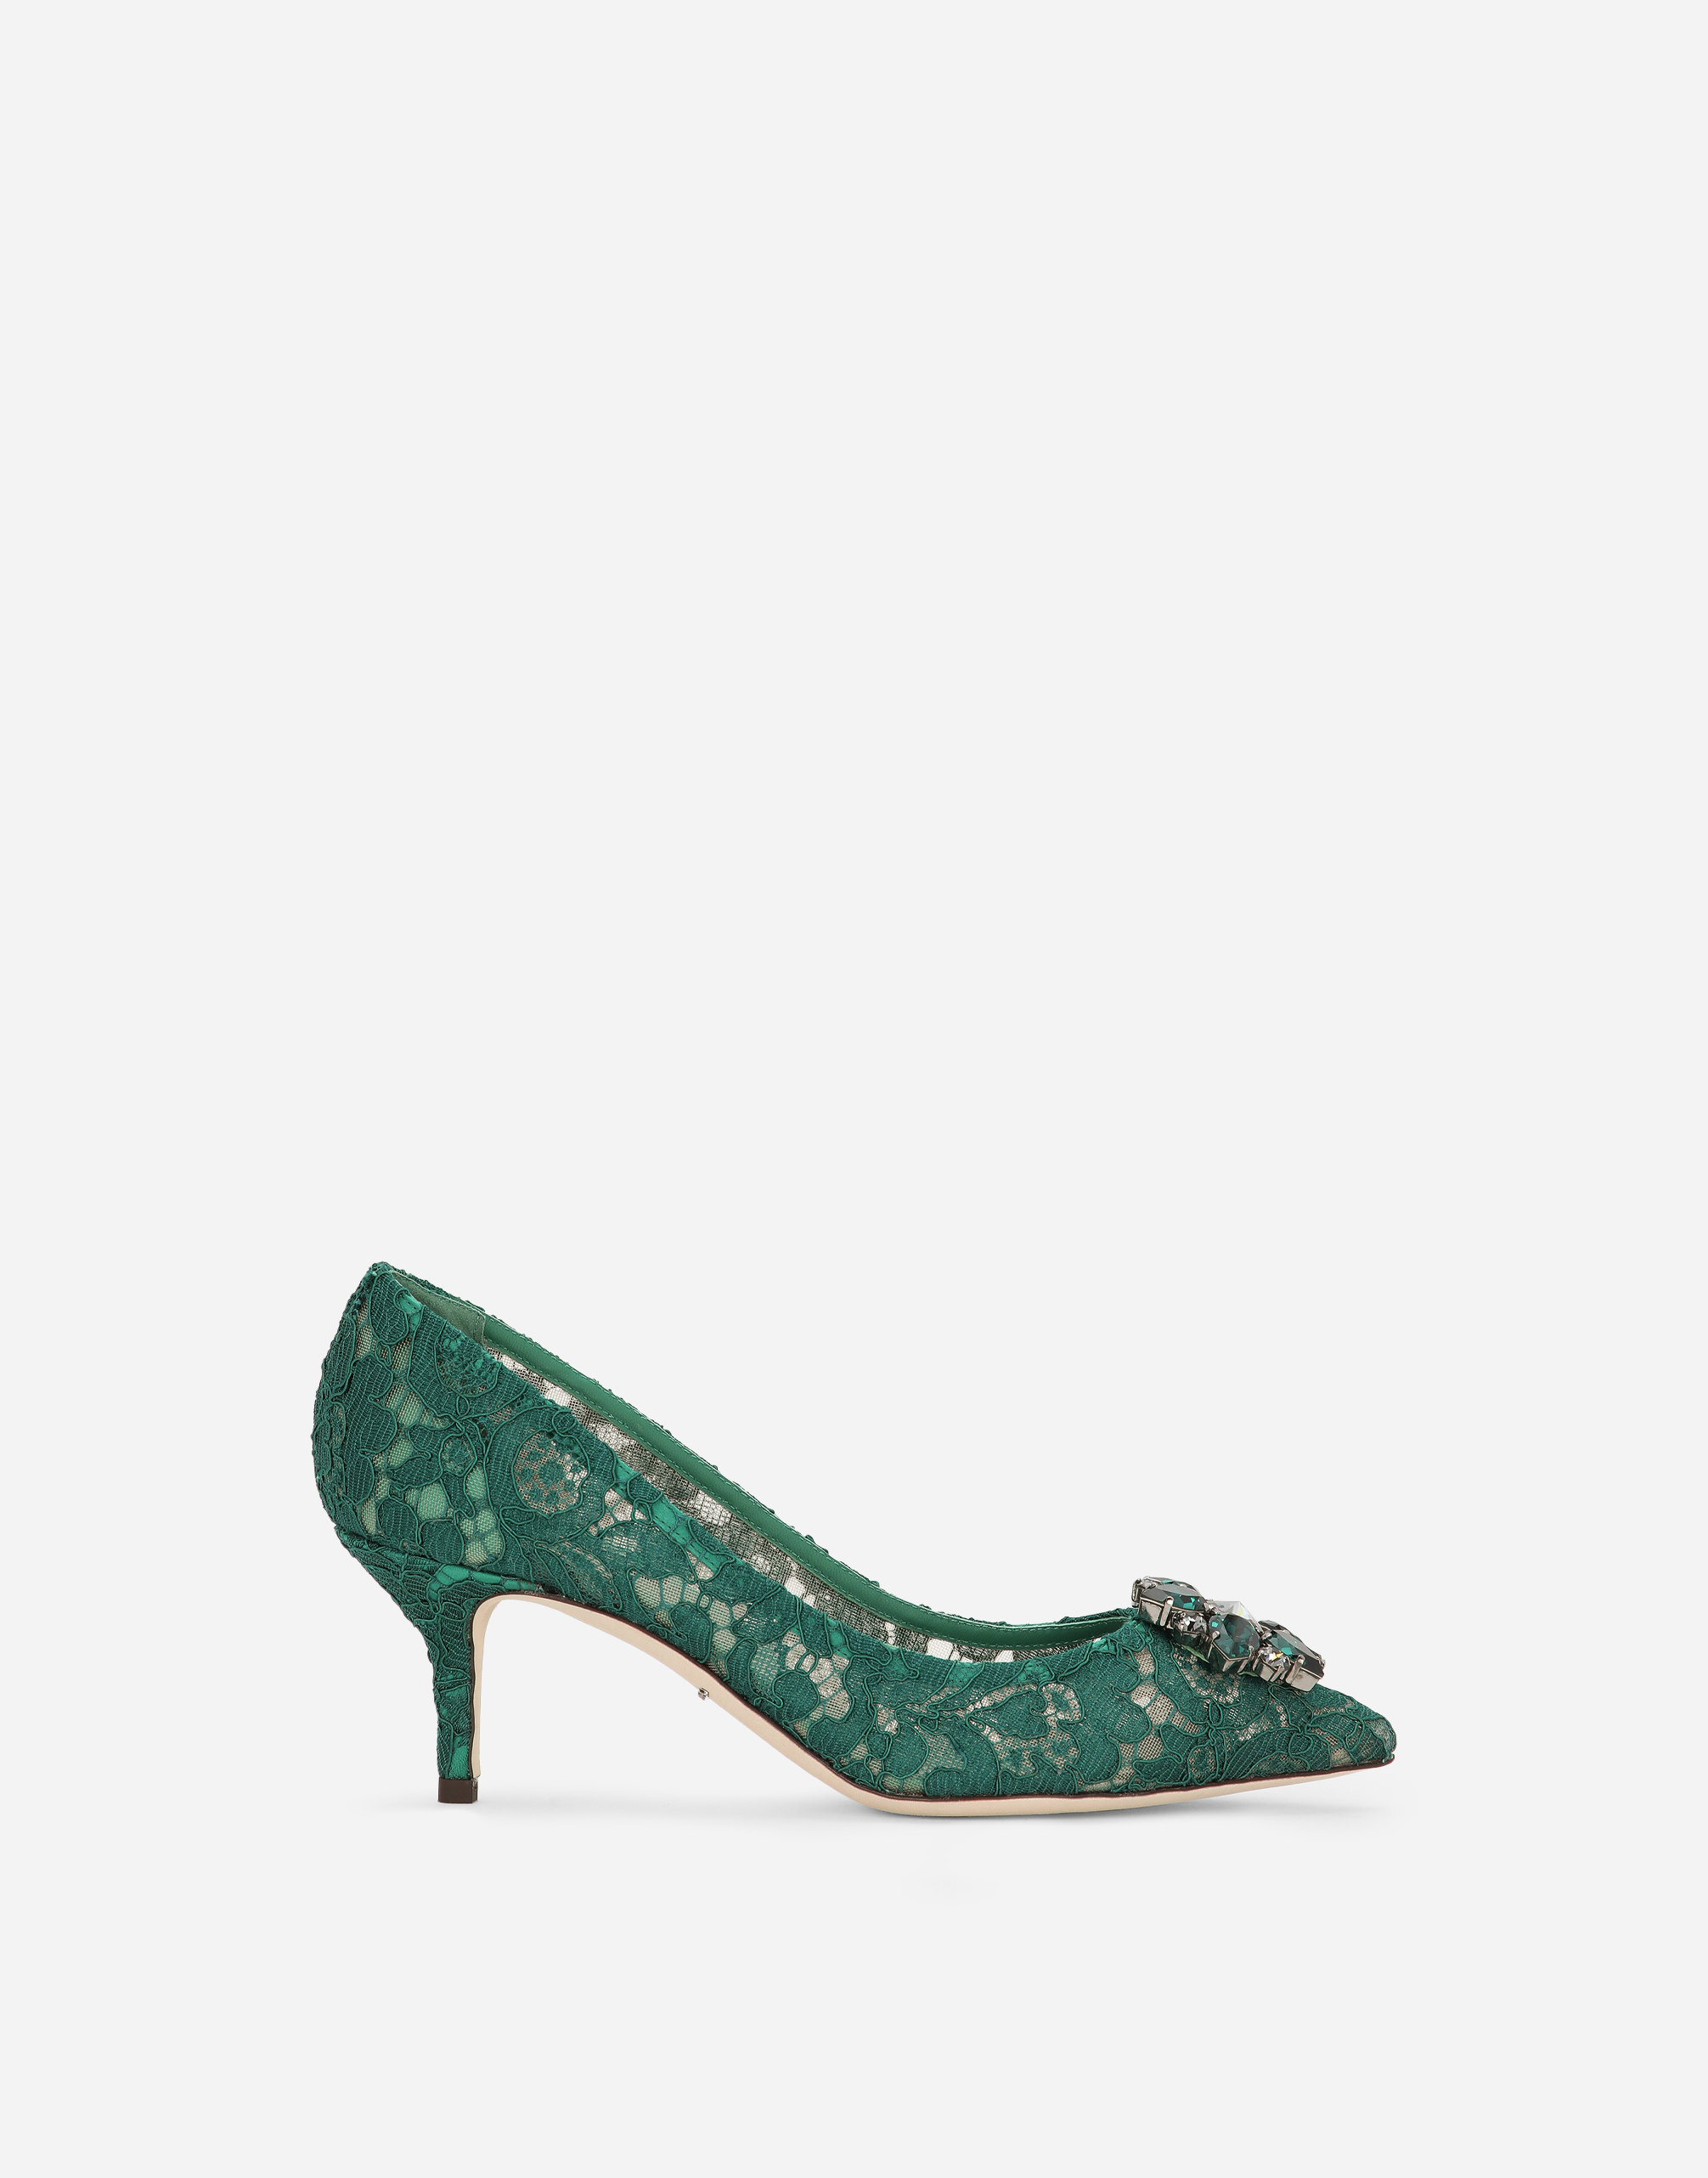 Lace rainbow pumps with brooch detailing in Green